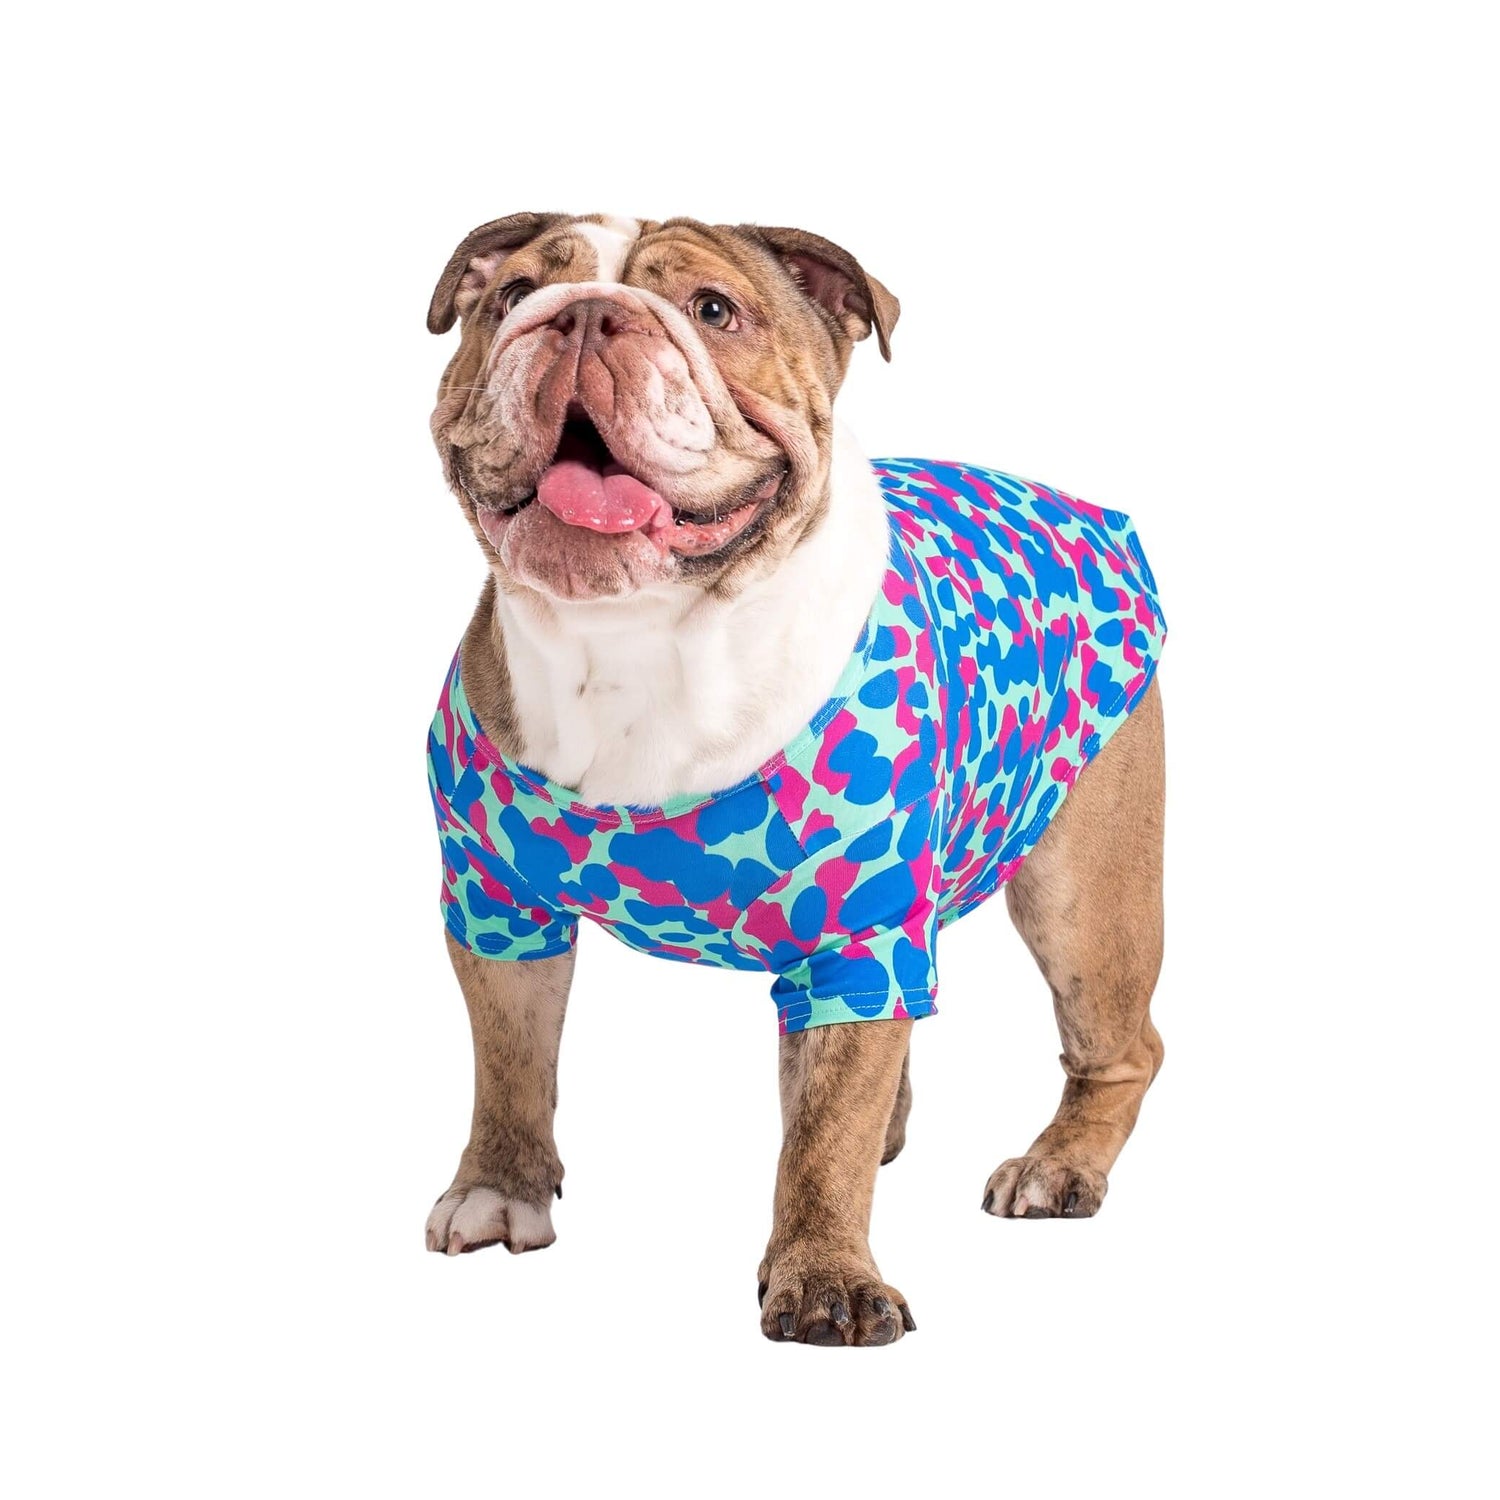 An English Bulldog facing front on wearing a dog shirt made by Vibrant Hound. It is Pink and blue circular blobs,.